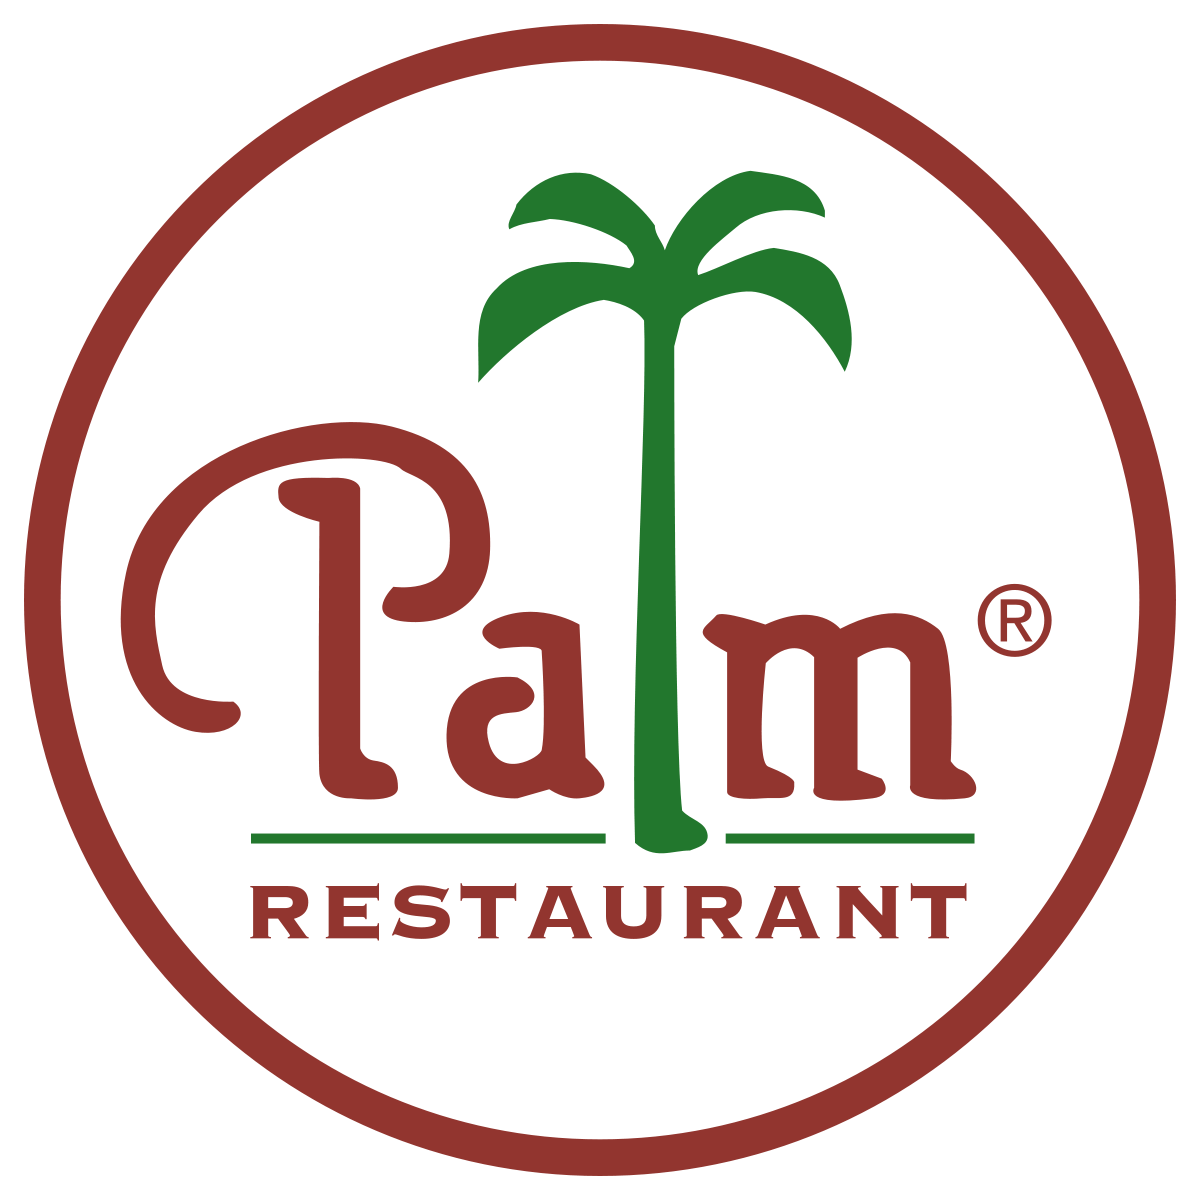 Restaurant with Red Oval Logo - The Palm (restaurant)